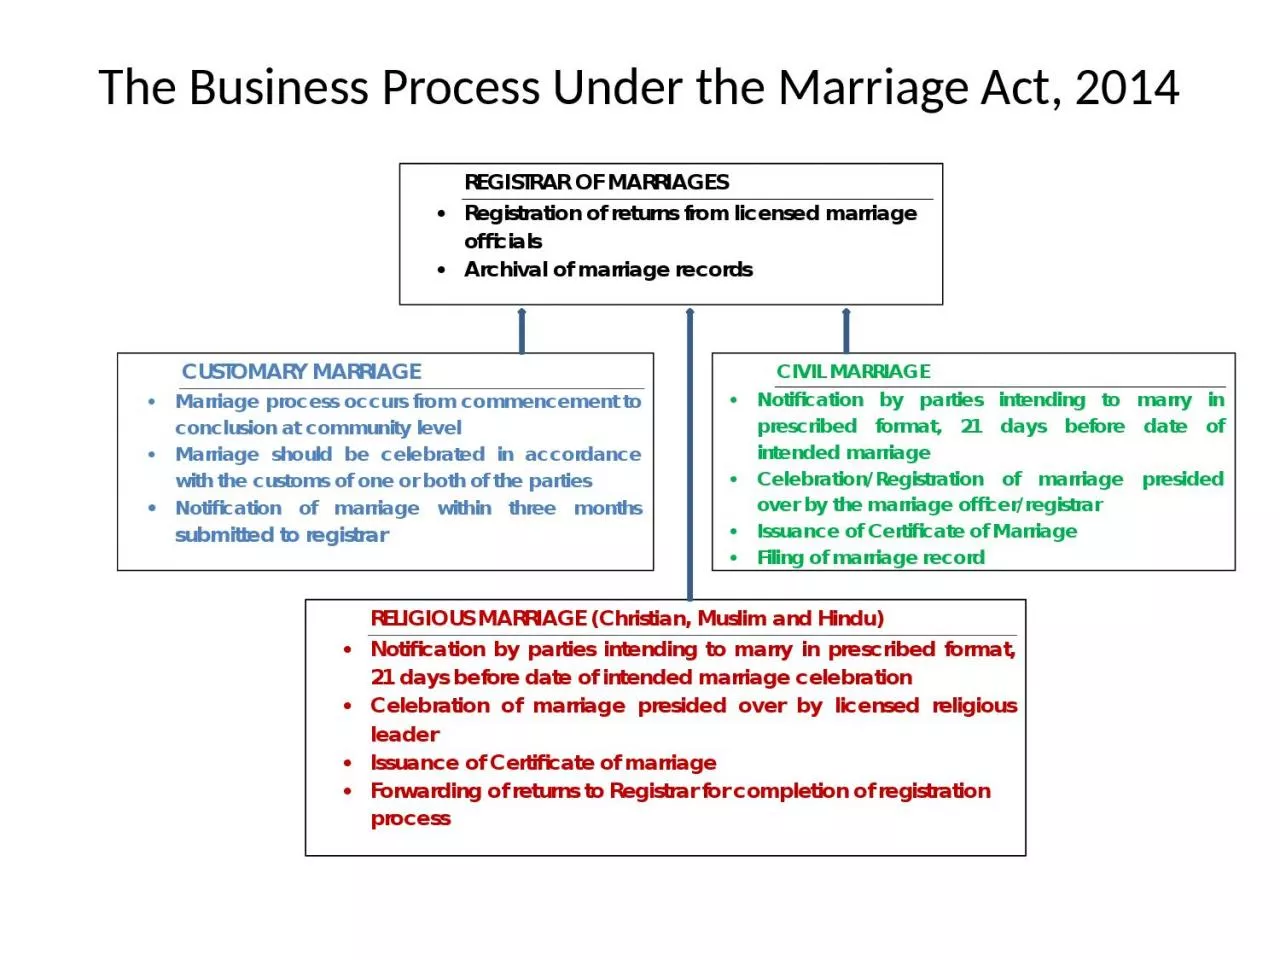 The Business Process Under the Marriage Act, 2014